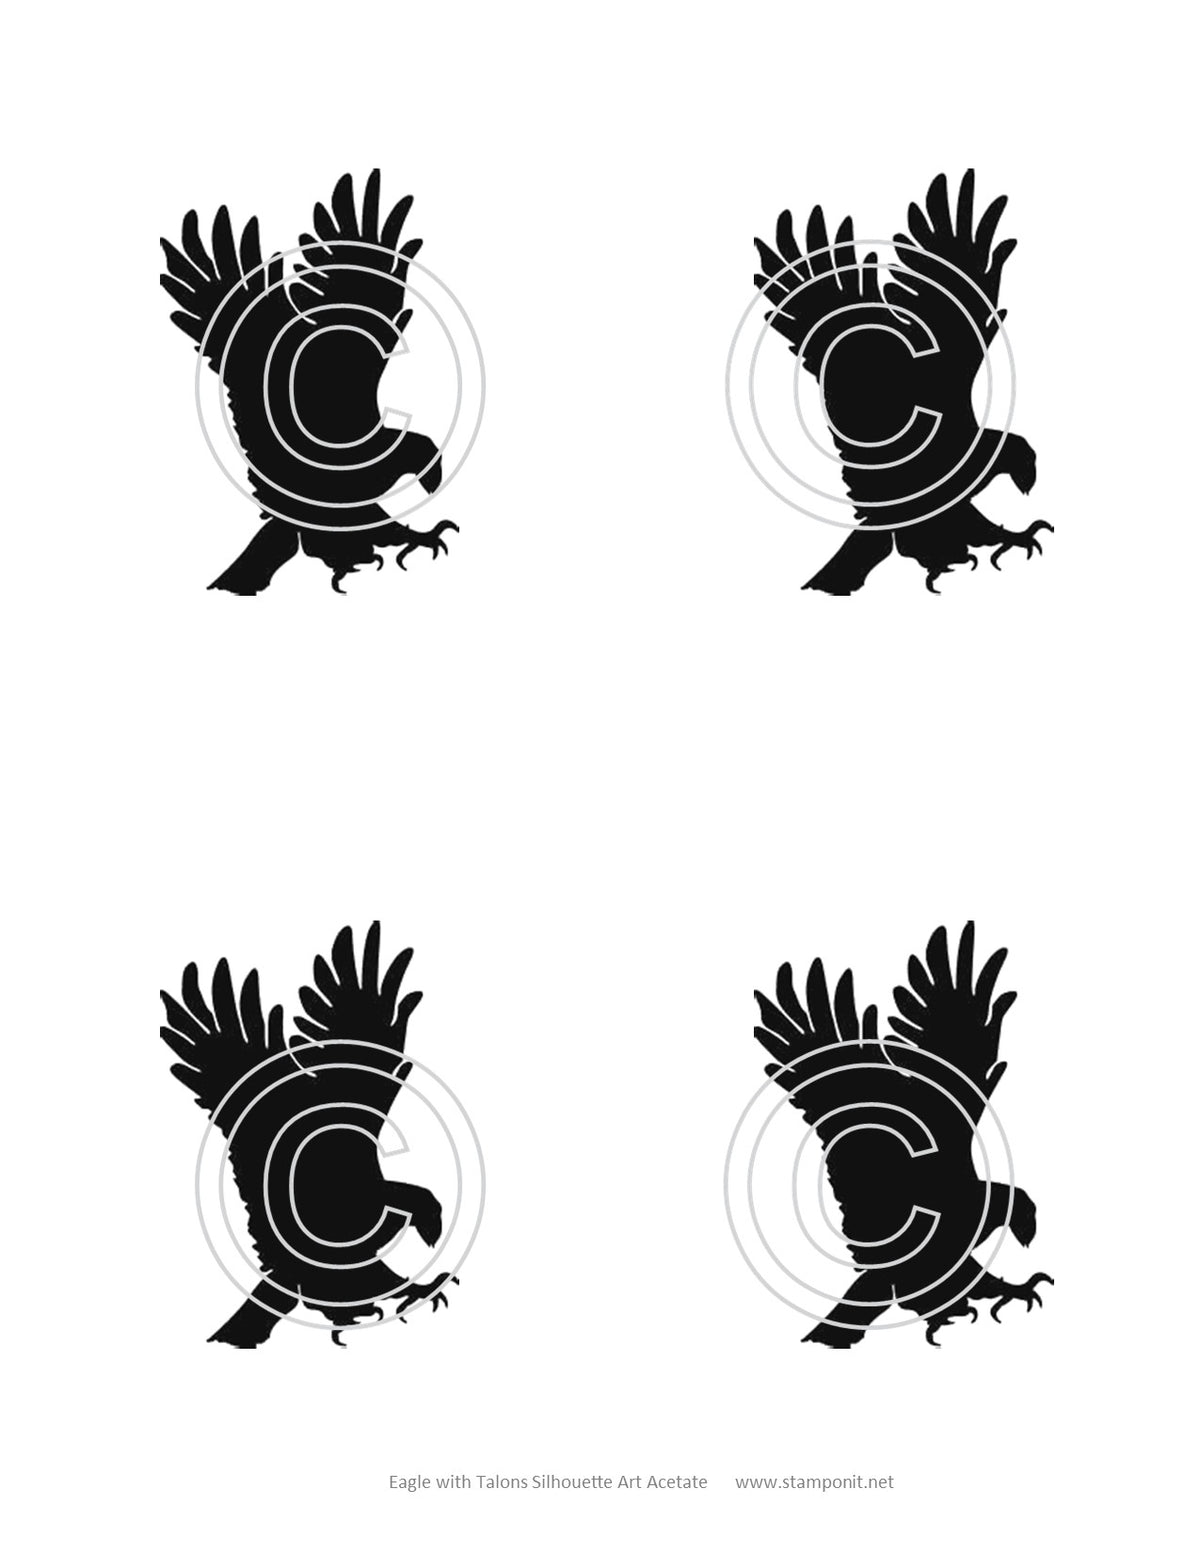 Eagle with Talons Art Acetate Silhouette